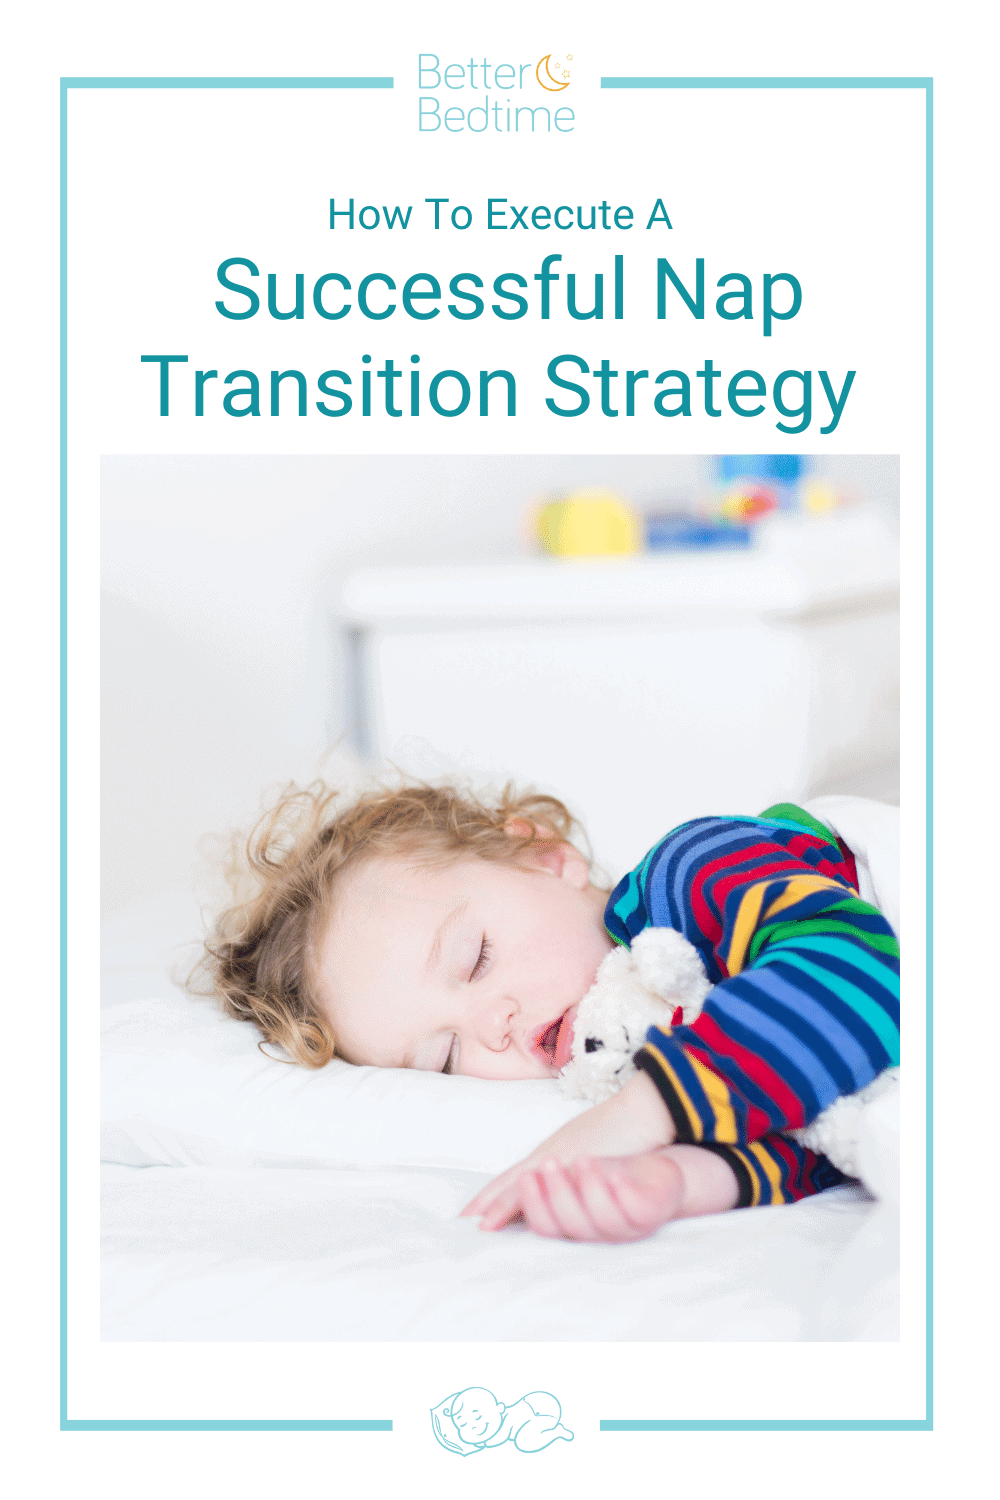 How To Execute a Successful Nap Transition Strategy